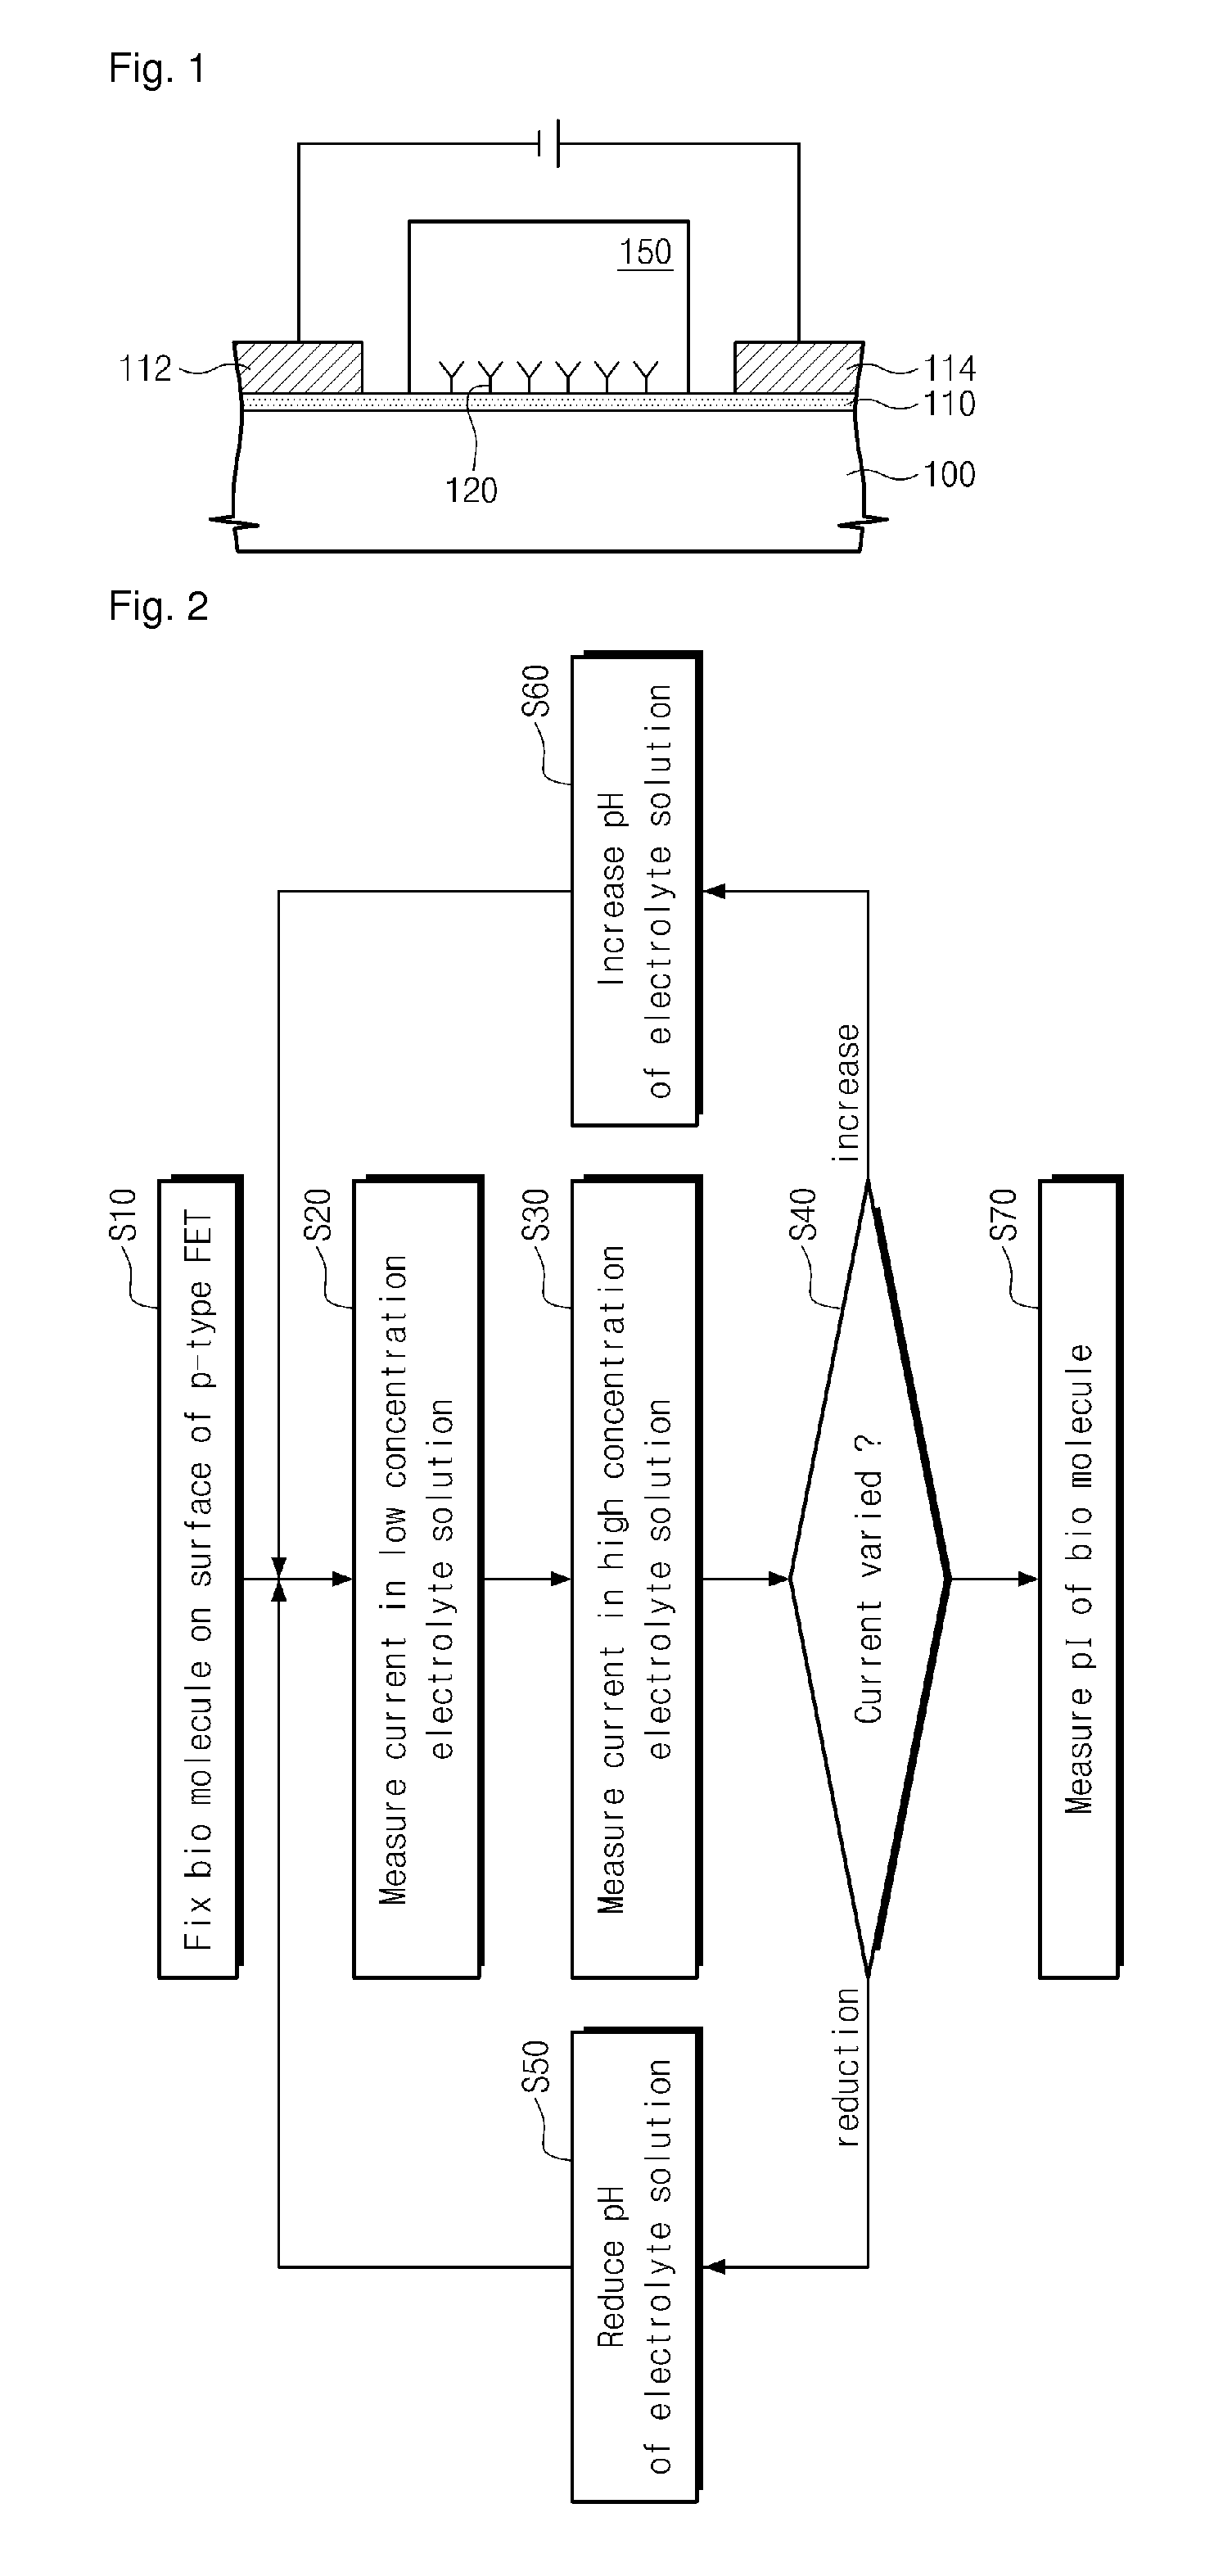 Method and apparatus for measuring isoelectric point using field effect transistor